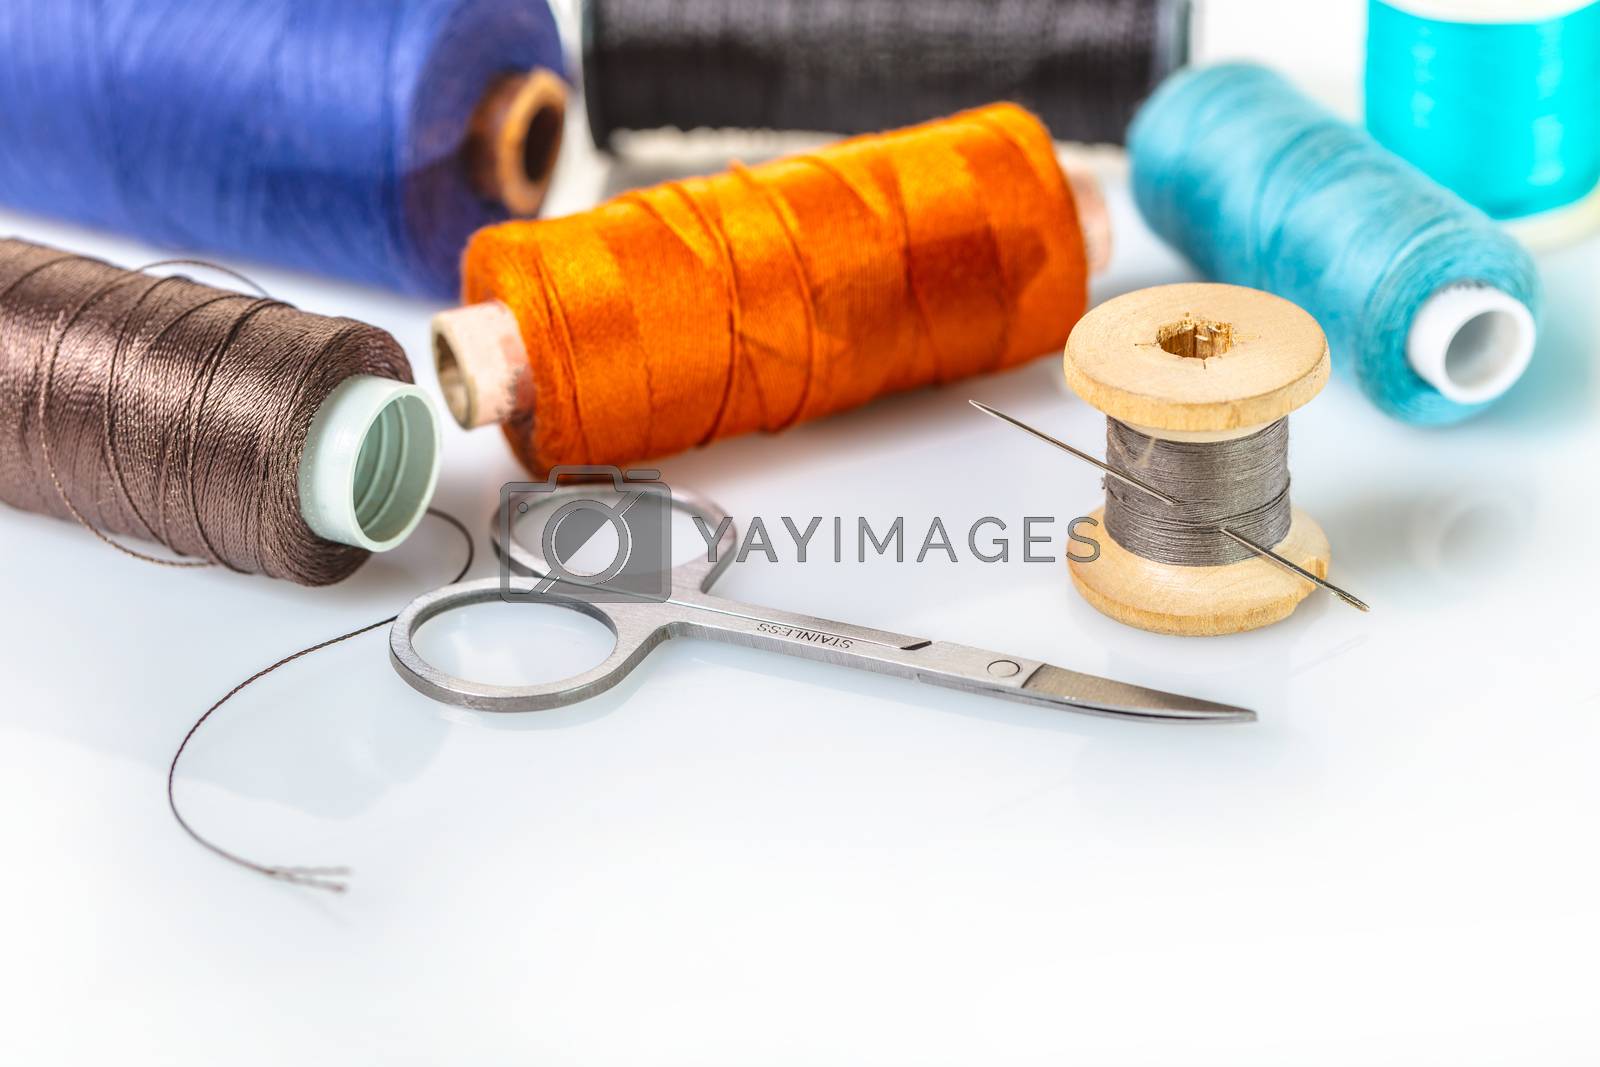 Royalty free image of coils with colorful thread  by MegaArt